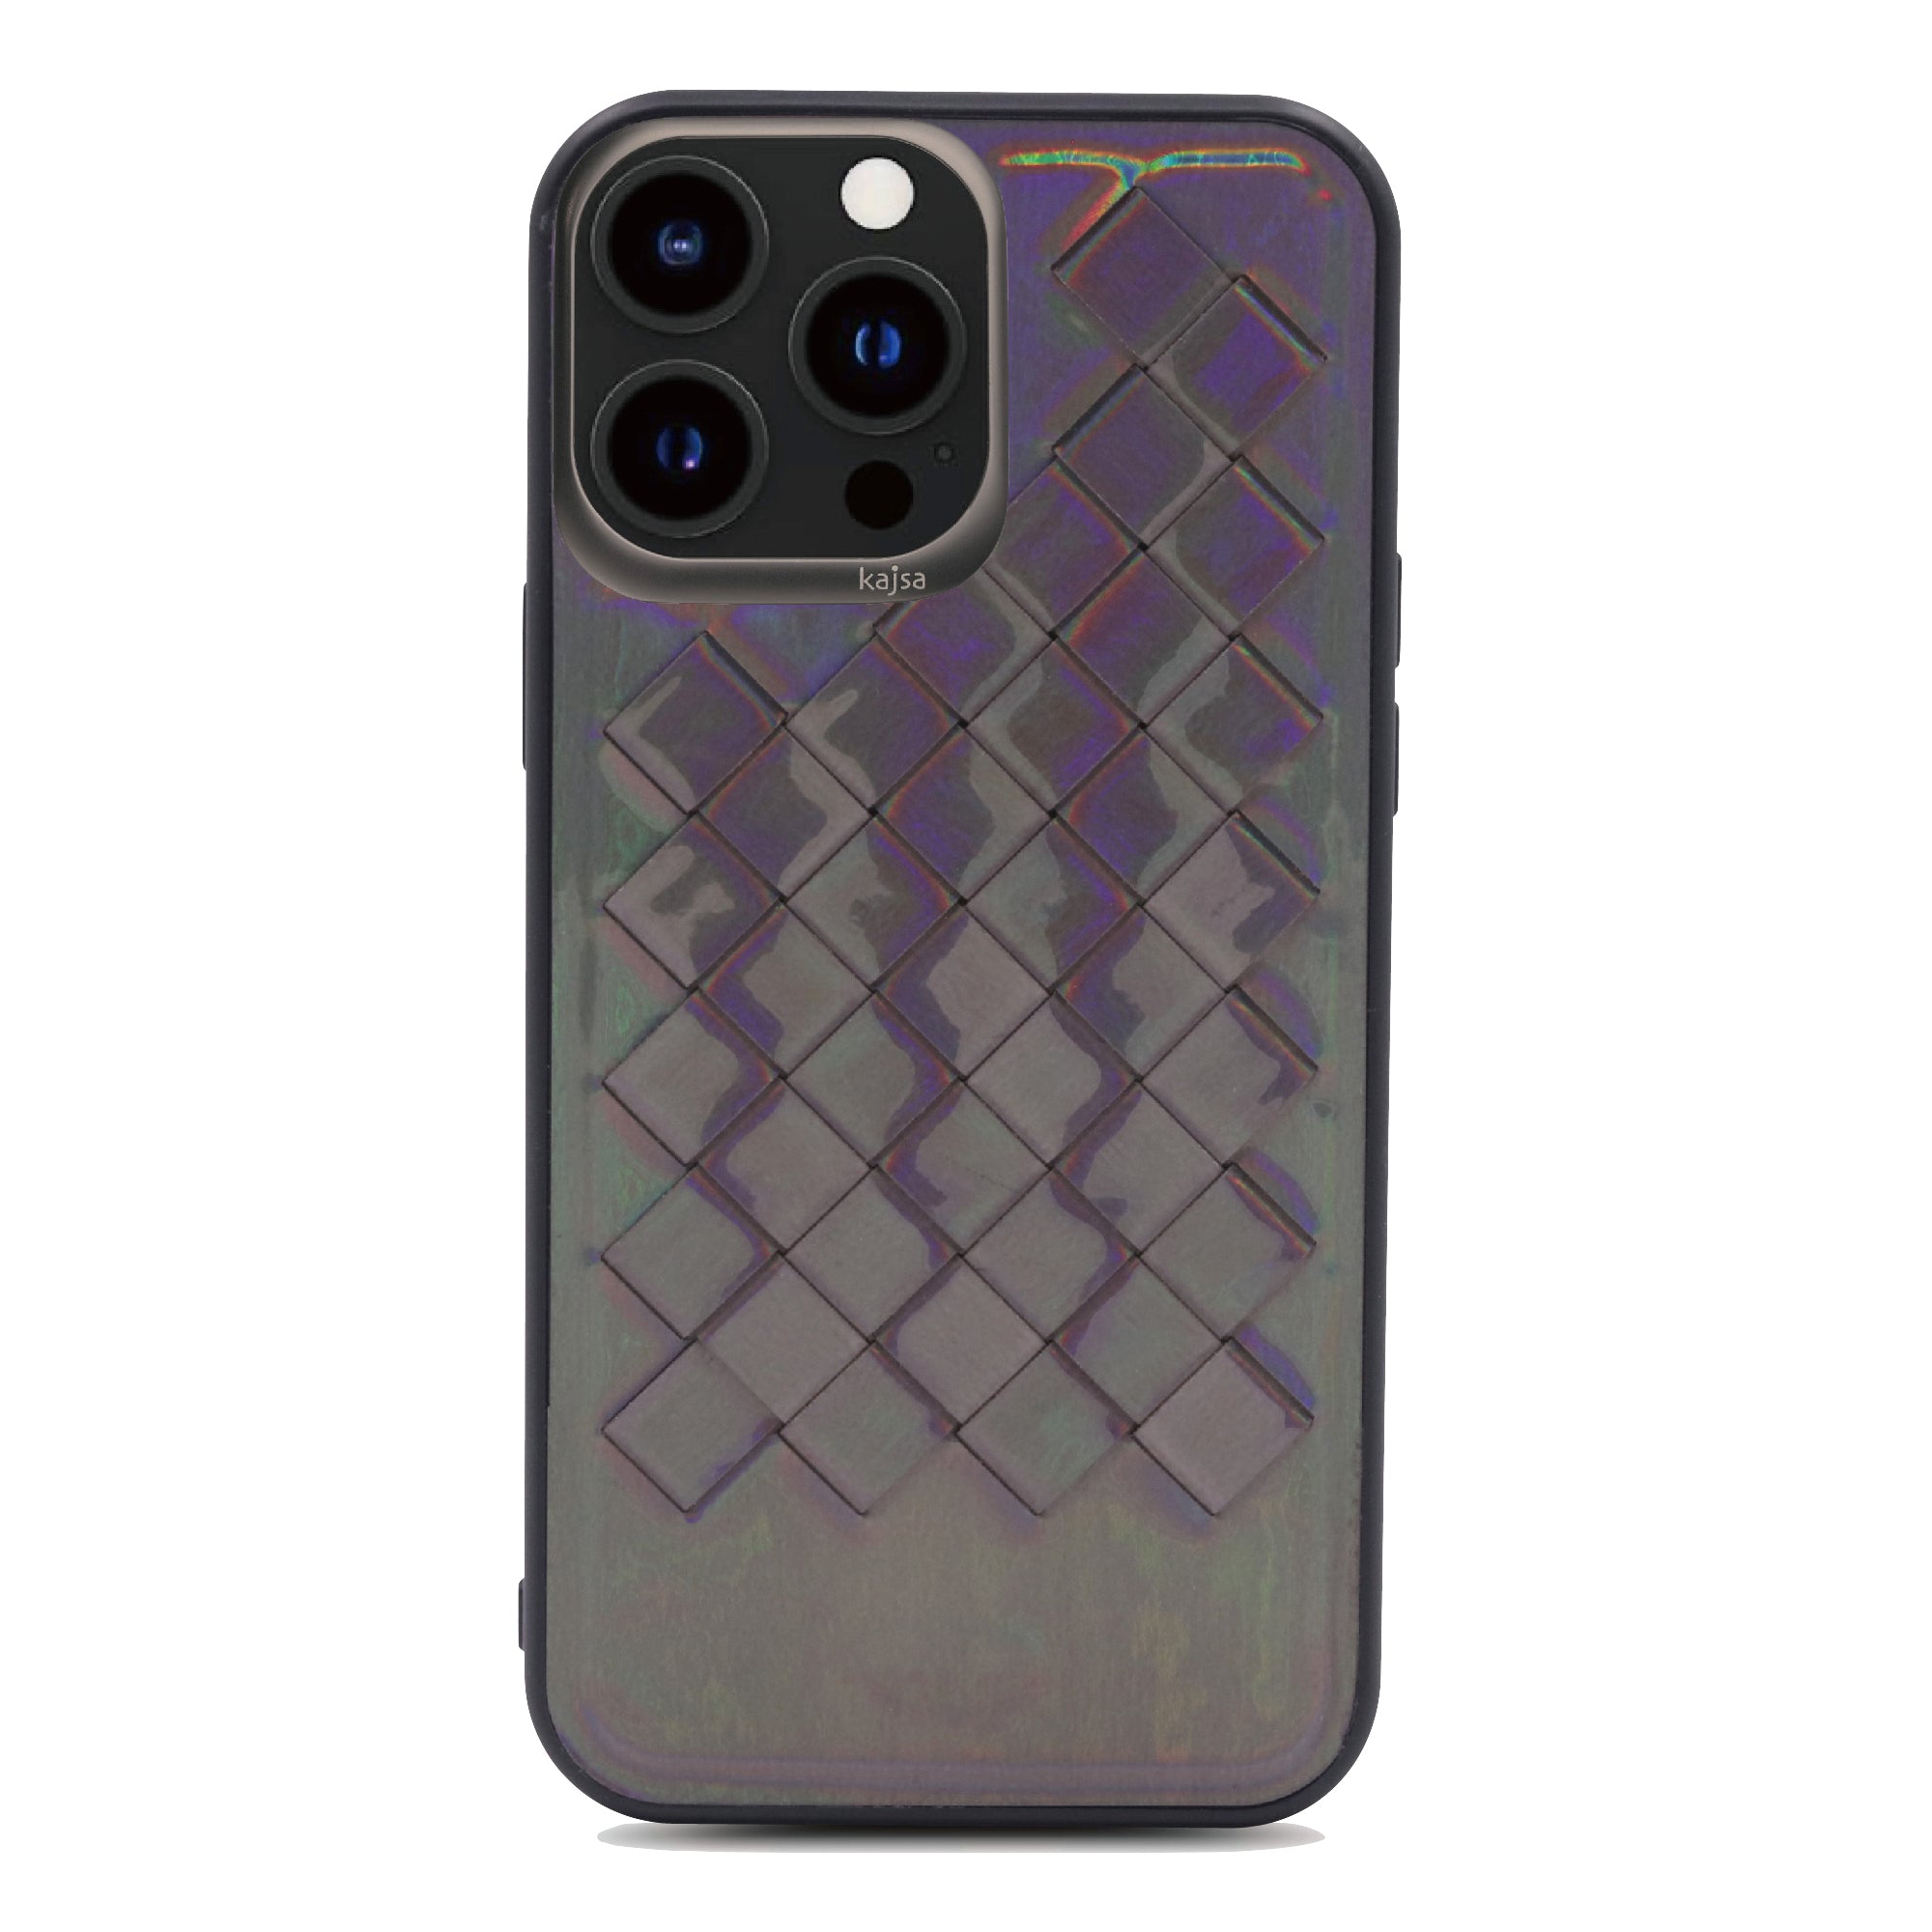 Preppie Collection - Sunshine Woven Back Case for iPhone 13-Phone Case- phone case - phone cases- phone cover- iphone cover- iphone case- iphone cases- leather case- leather cases- DIYCASE - custom case - leather cover - hand strap case - croco pattern case - snake pattern case - carbon fiber phone case - phone case brand - unique phone case - high quality - phone case brand - protective case - buy phone case hong kong - online buy phone case - iphone‎手機殼 - 客製化手機殼 - samsung ‎手機殼 - 香港手機殼 - 買電話殼